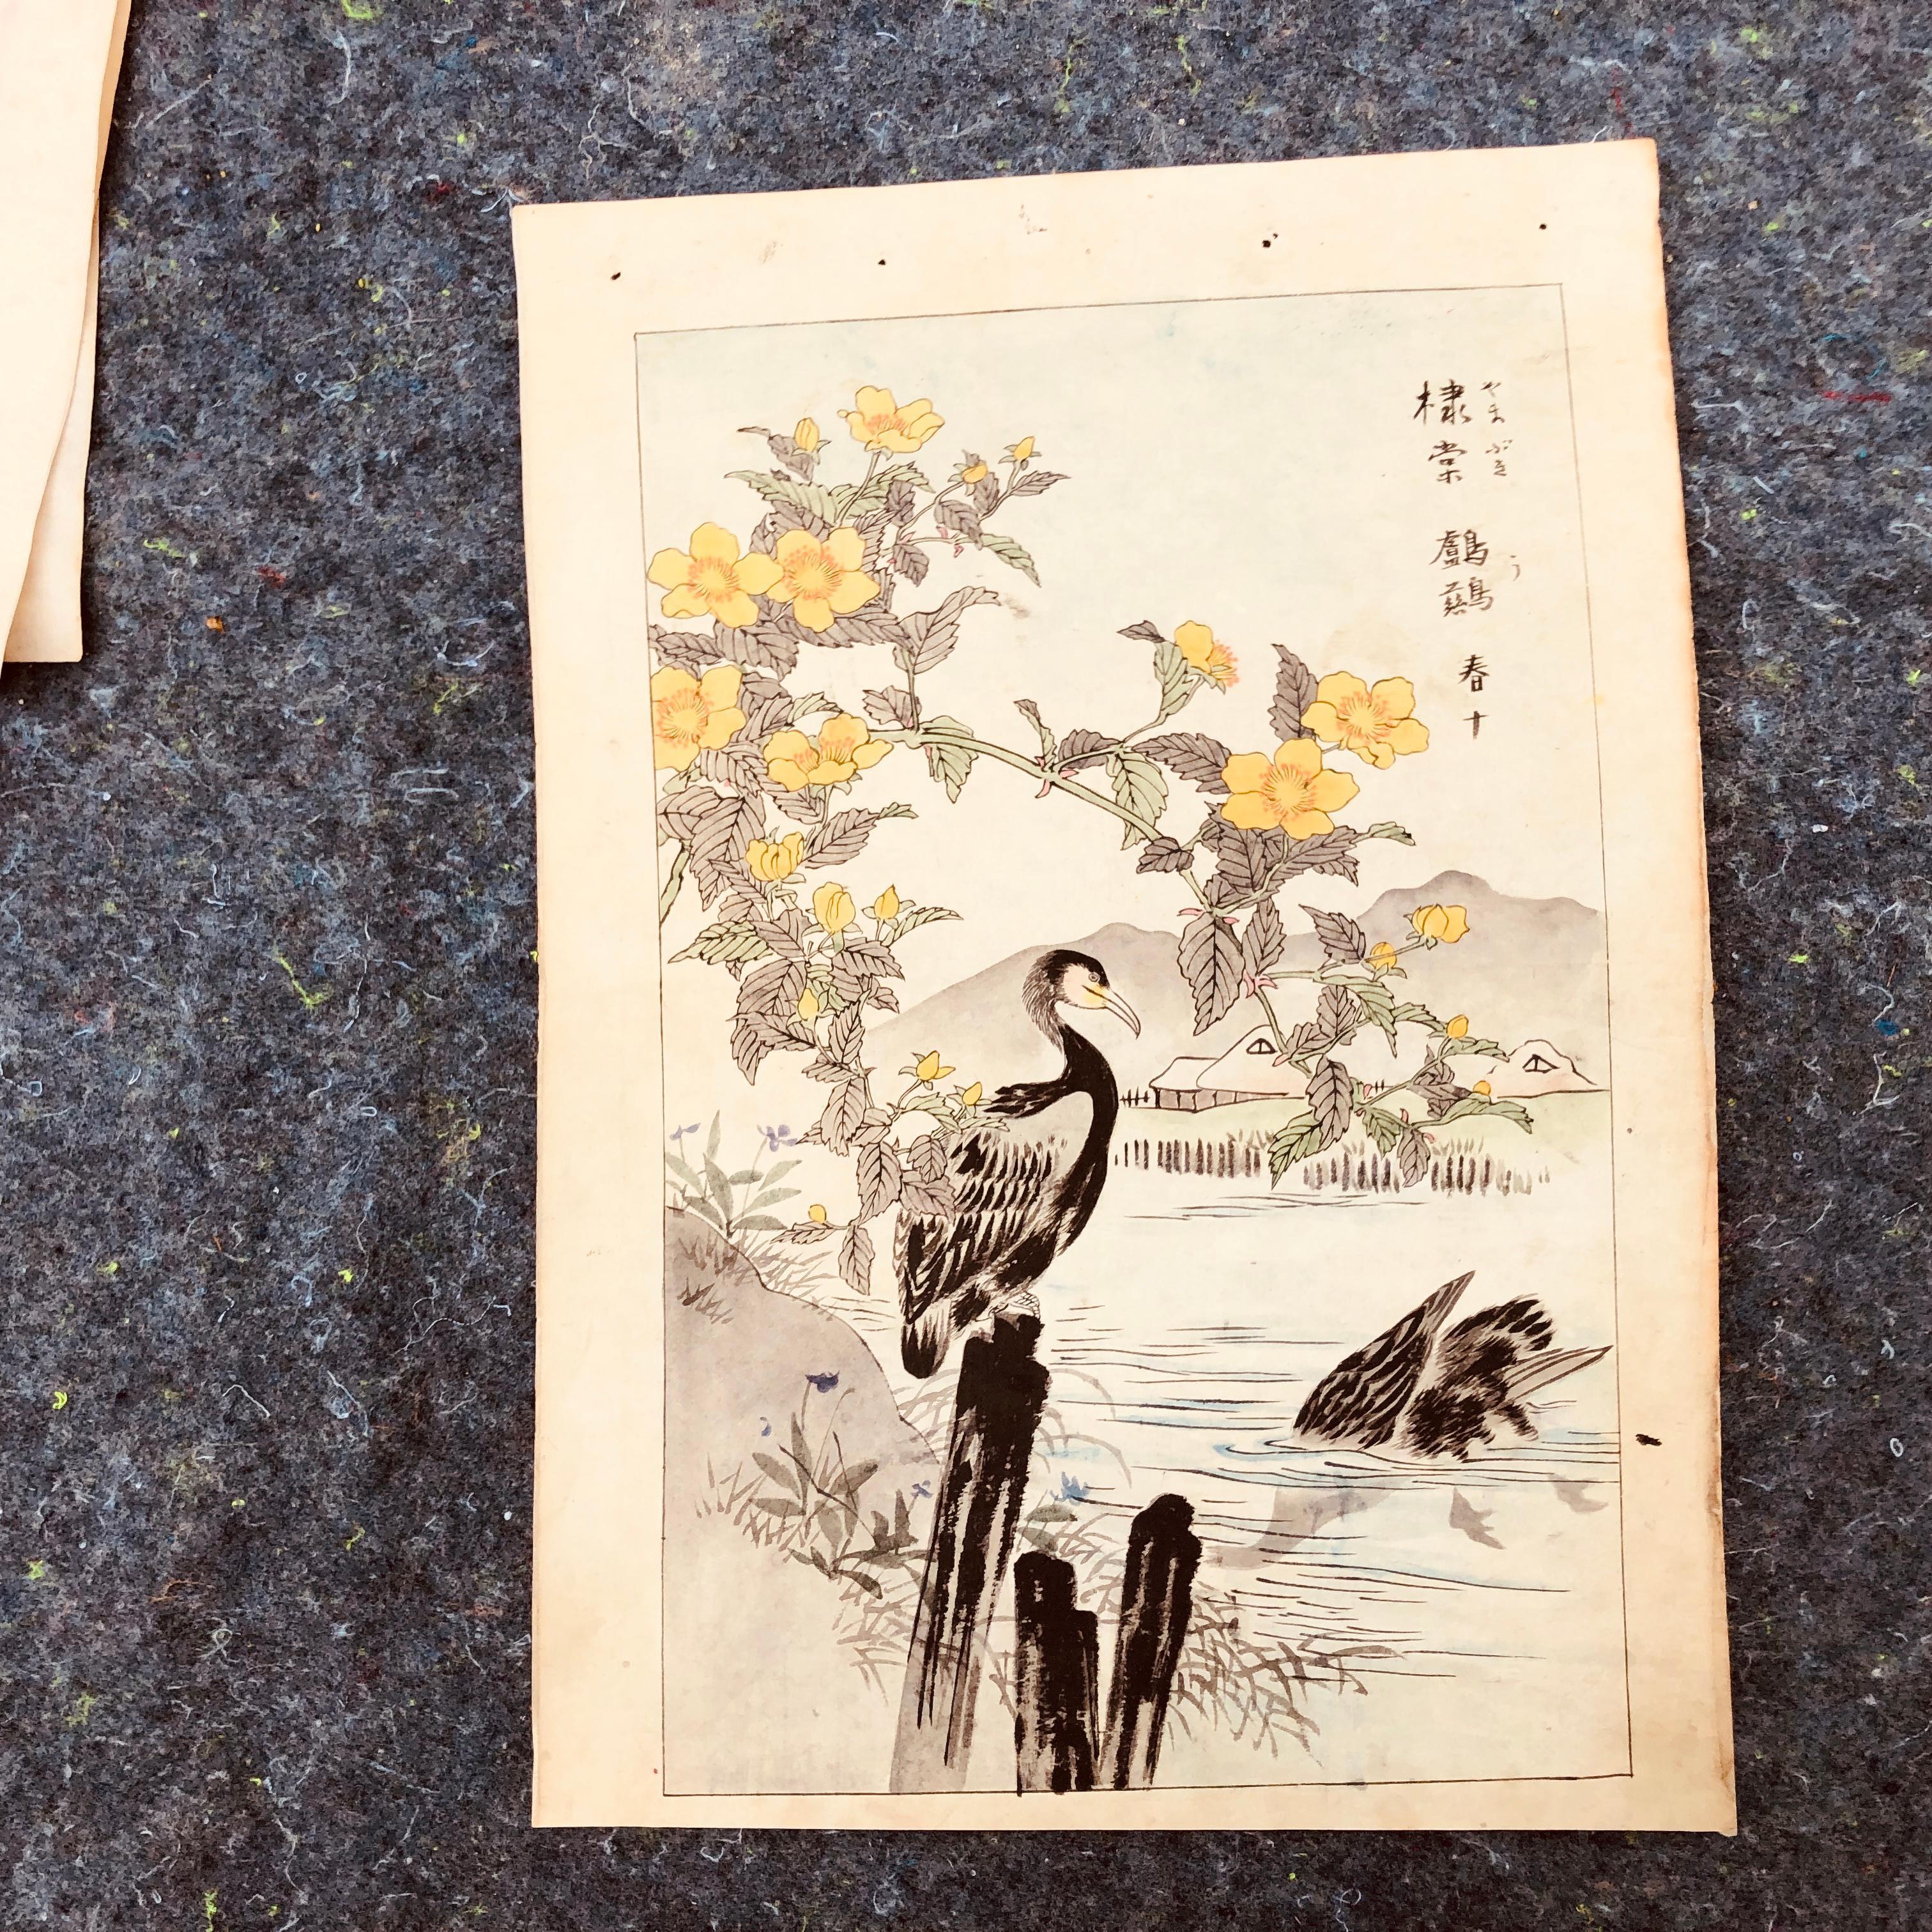 From our recent Japanese Acquisitions Travels, #3

A unique and scarce set of three (3) large format 